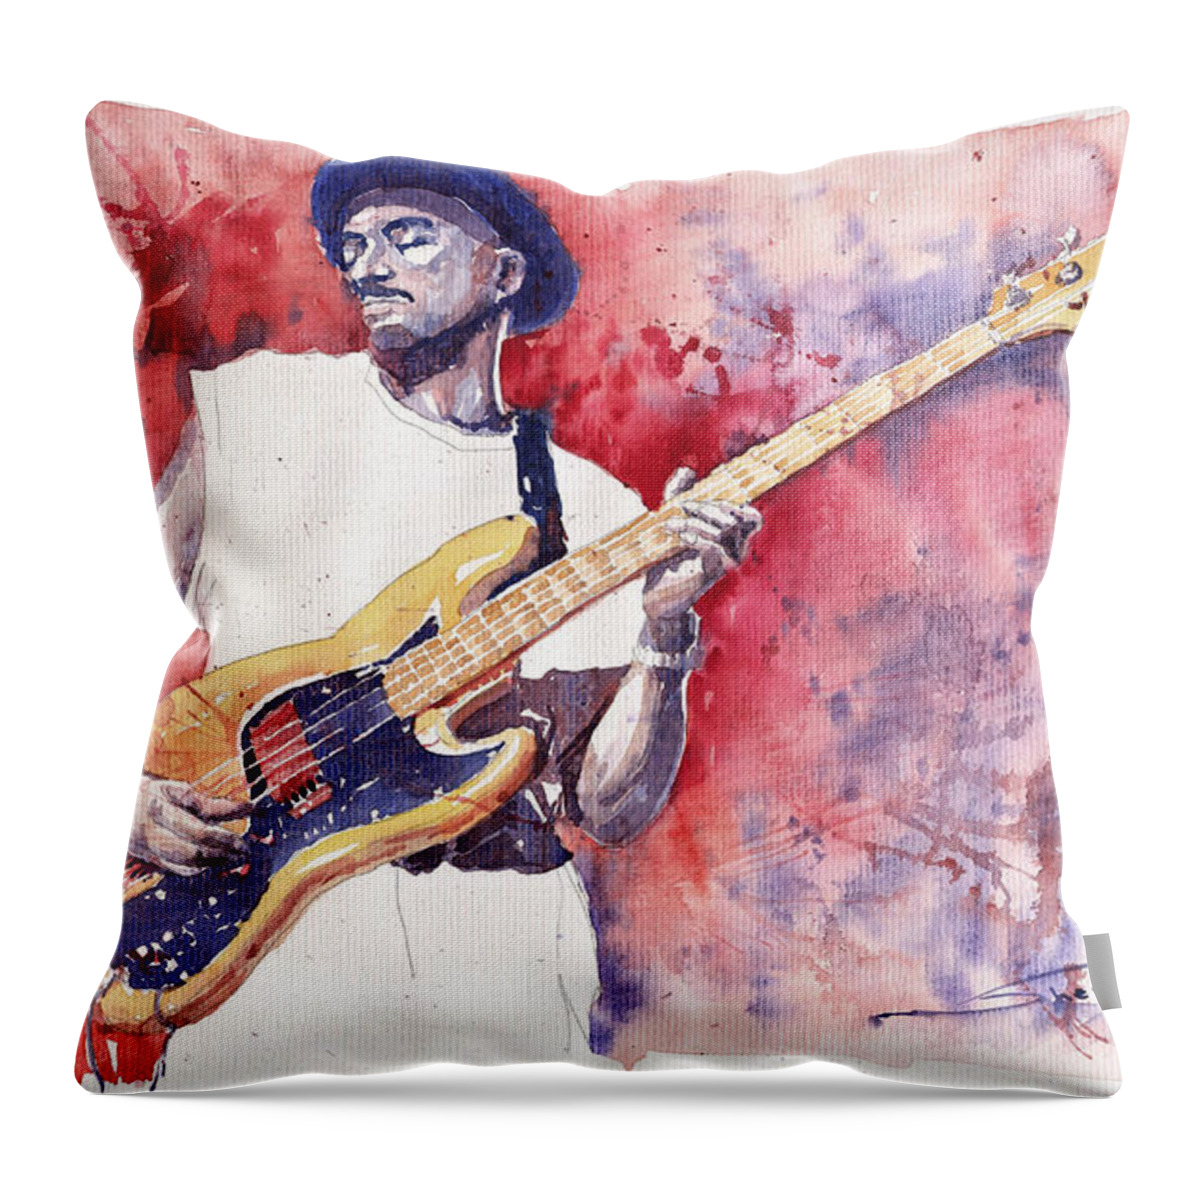 Jazz Throw Pillow featuring the painting Jazz Guitarist Marcus Miller Red by Yuriy Shevchuk